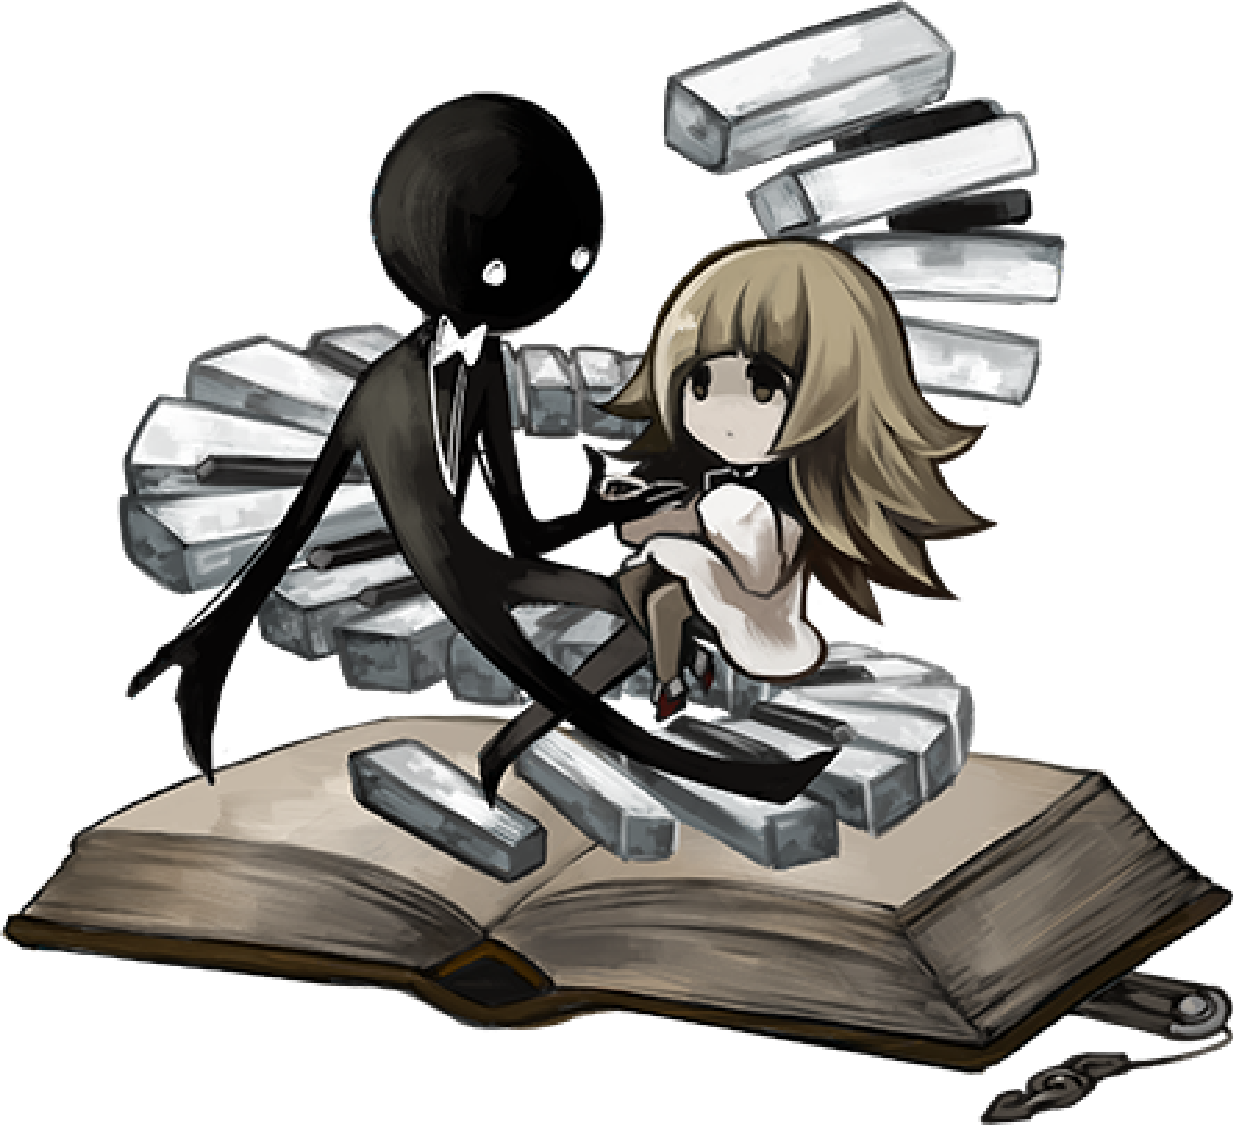 Images of Deemo | 1233x1125